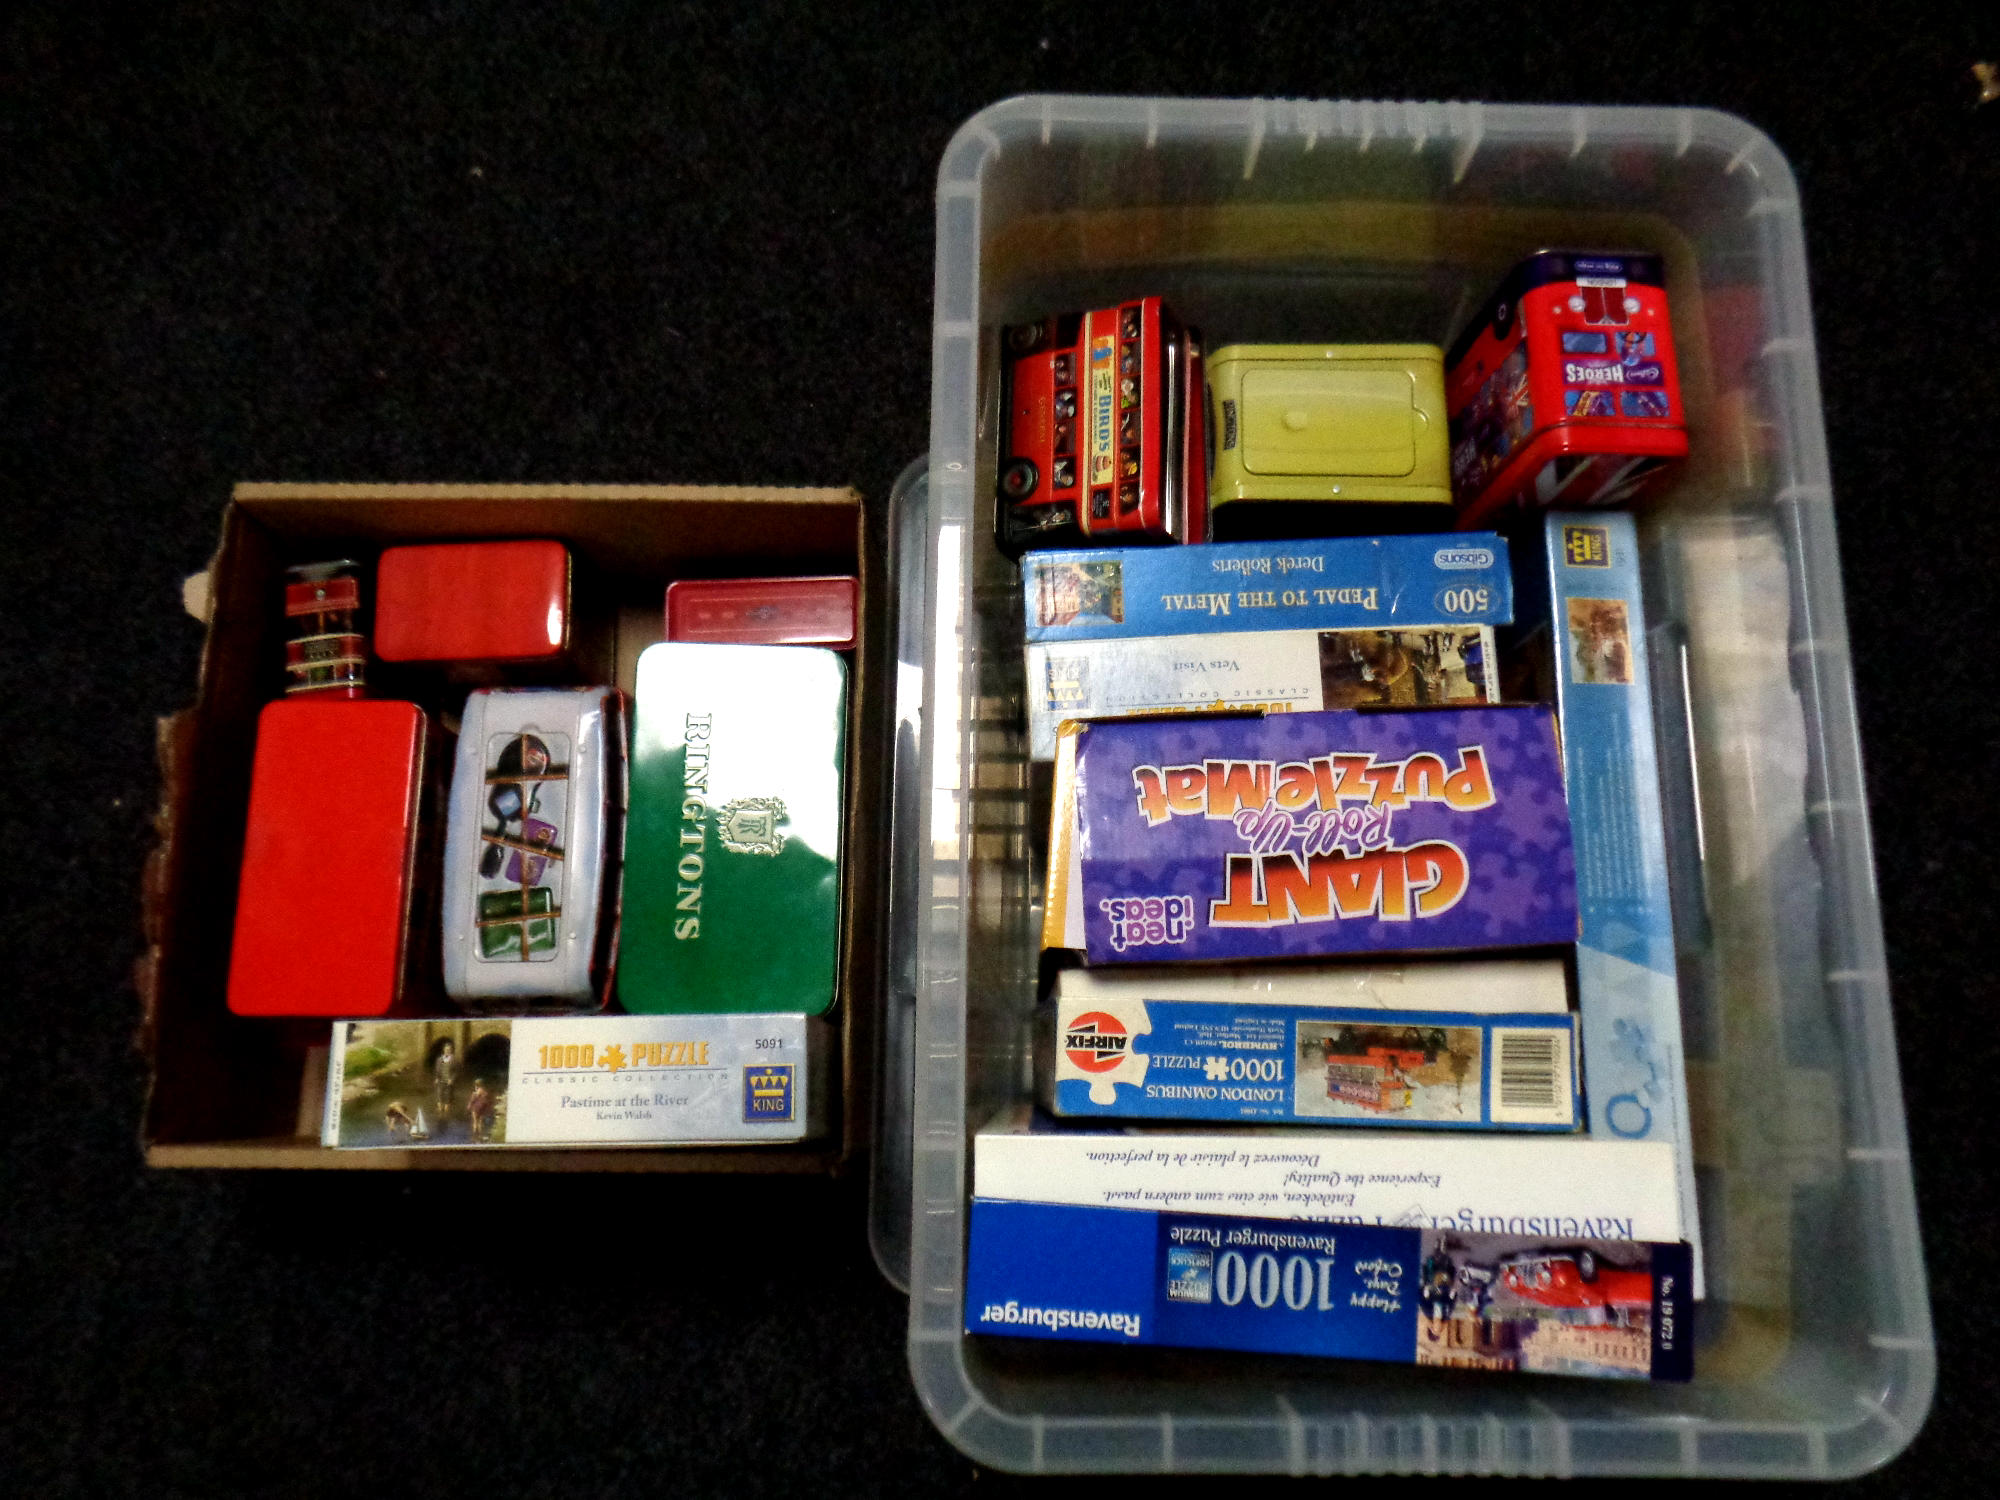 A plastic storage crate with lid together with a box containing Airfix modelling kit, jigsaws,